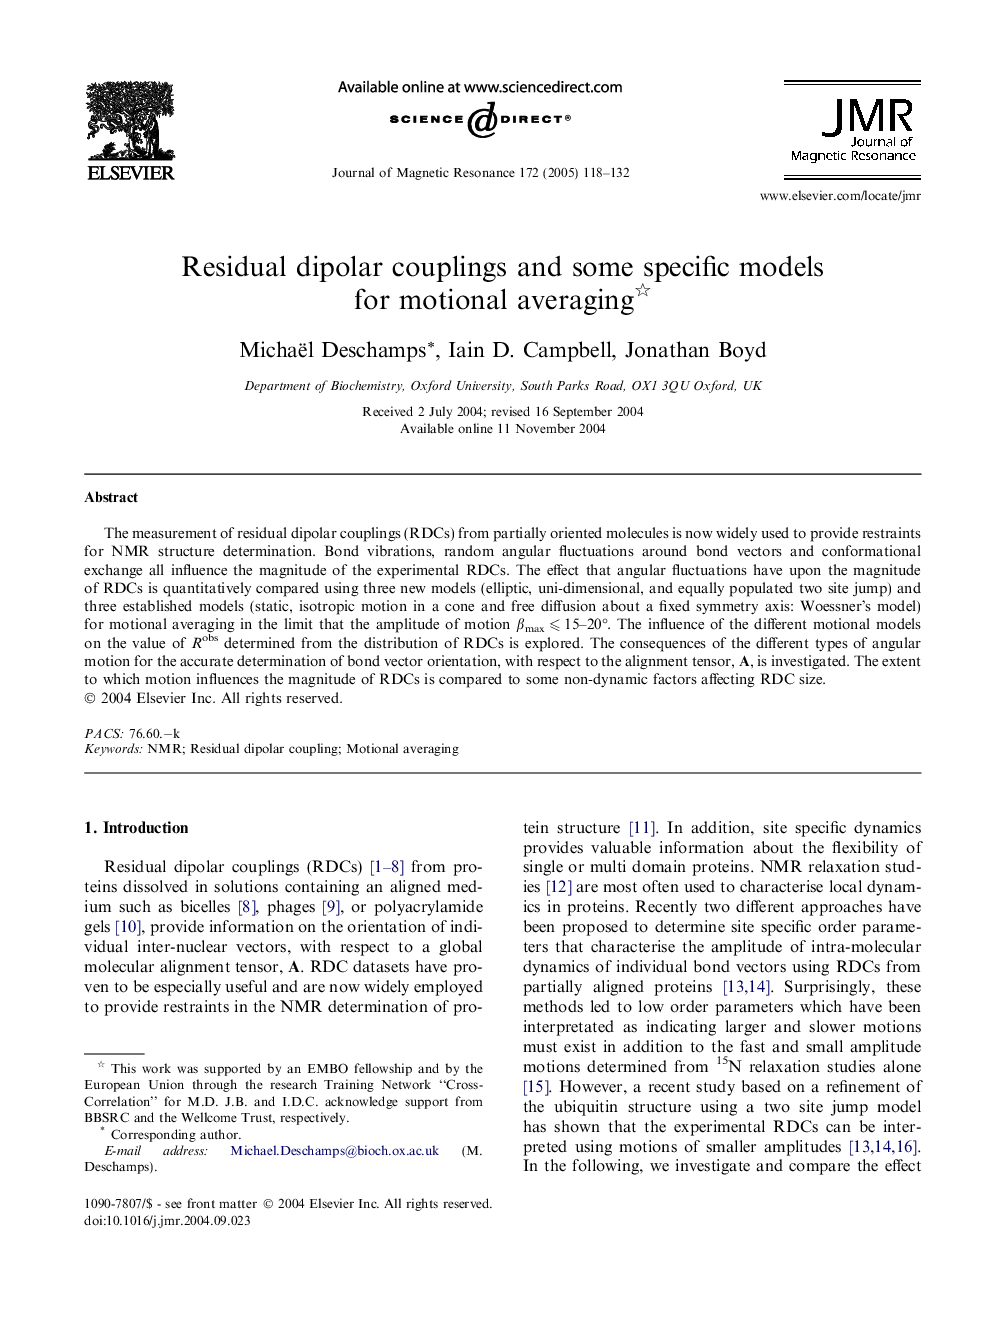 Residual dipolar couplings and some specific models for motional averaging